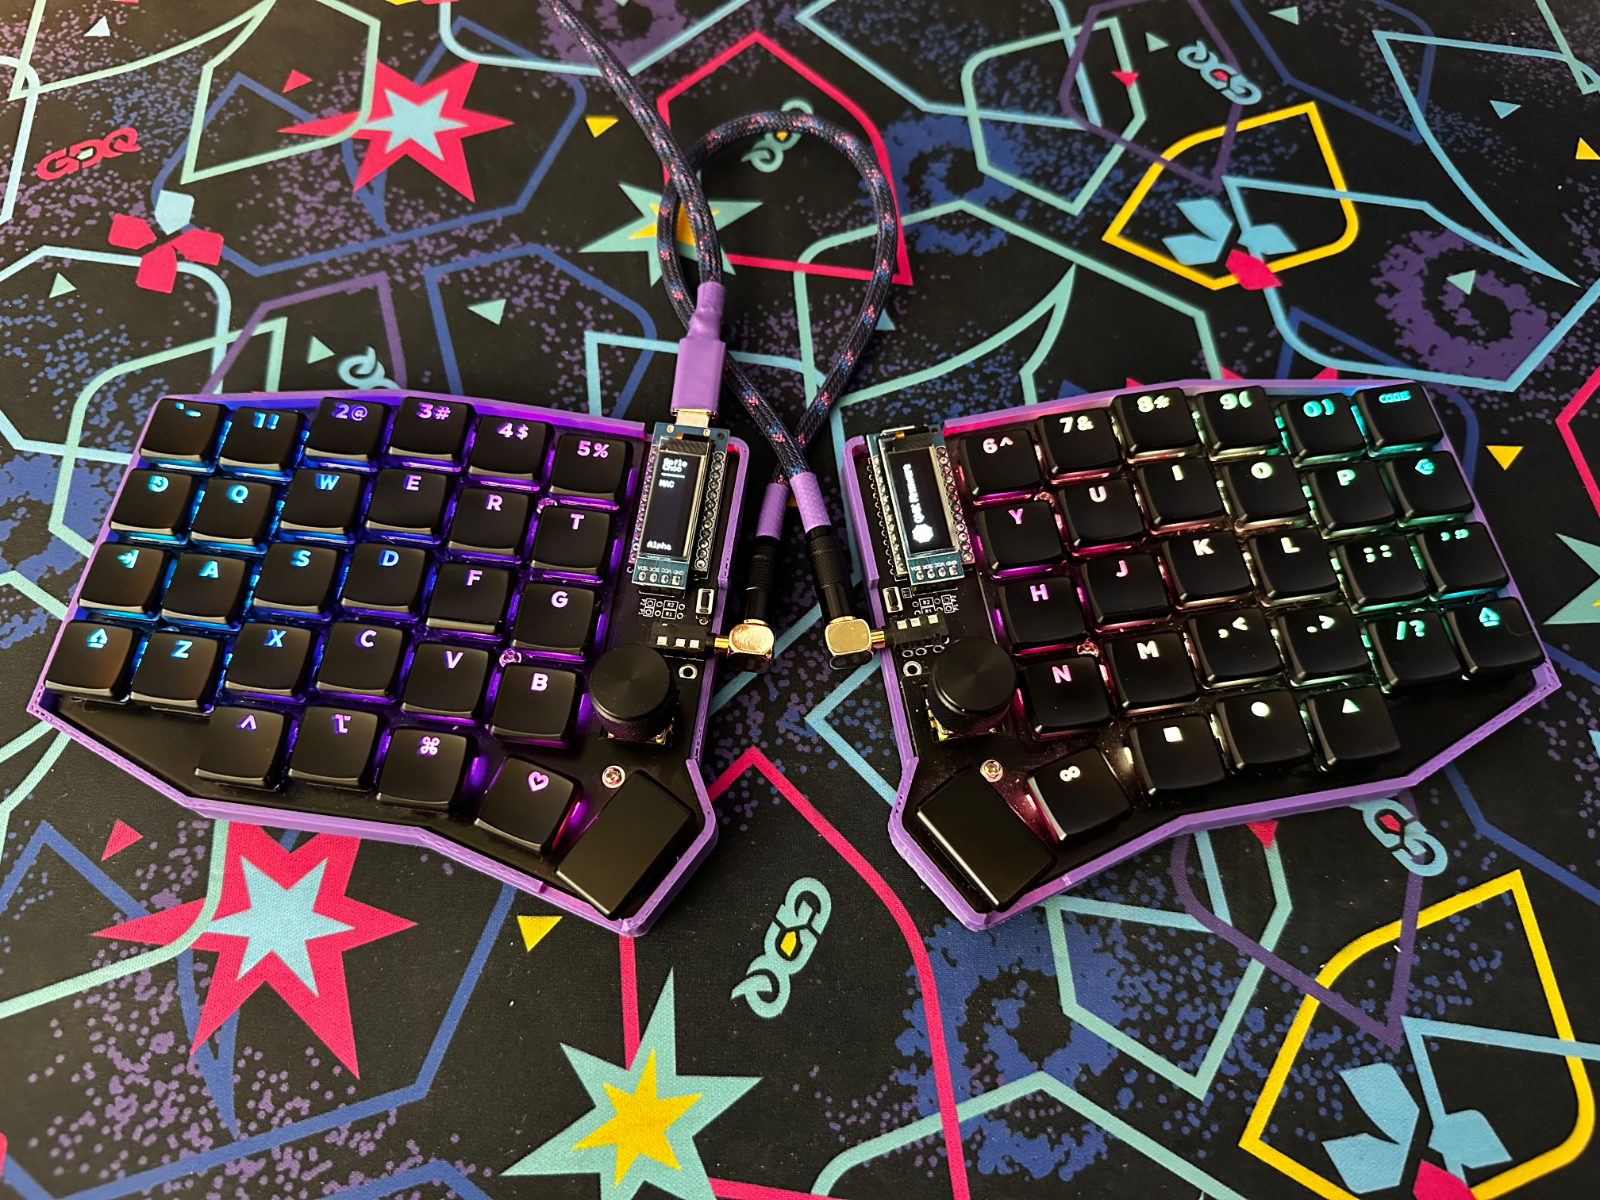 A Review of the Sofle Choc (Or: A Slow Decent Into Mechanical Keyboard Nerdery)